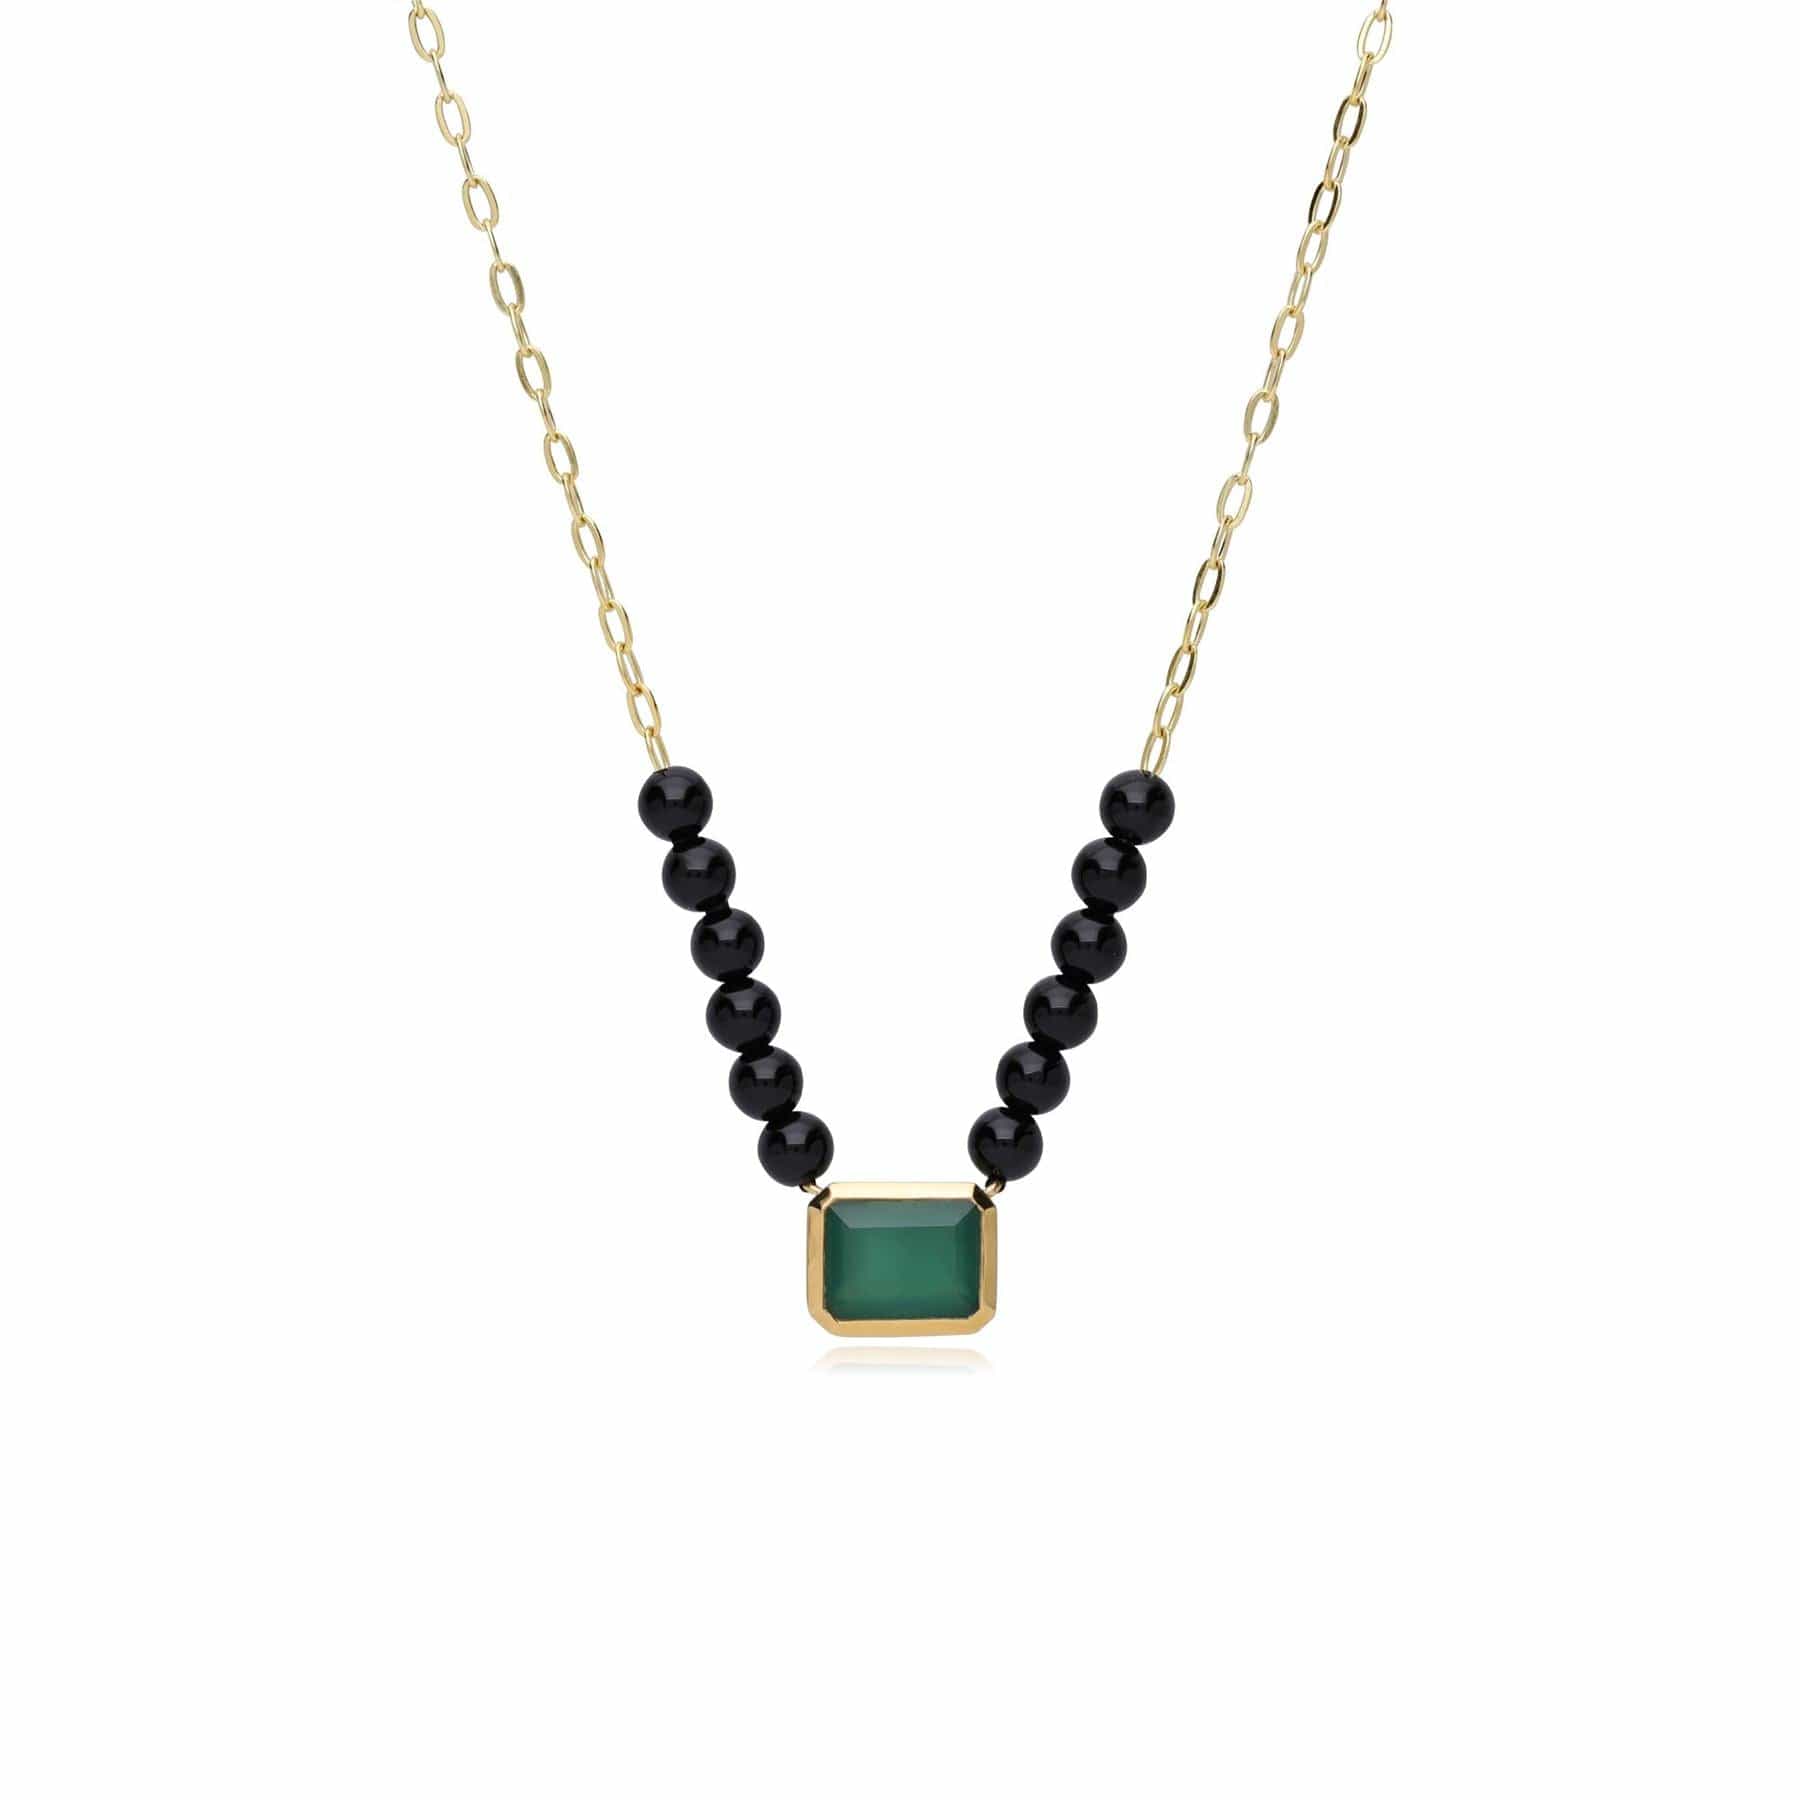 ECFEW™ 'The Unifier' Dyed Green Chalcedony & Onyx Bead Necklace